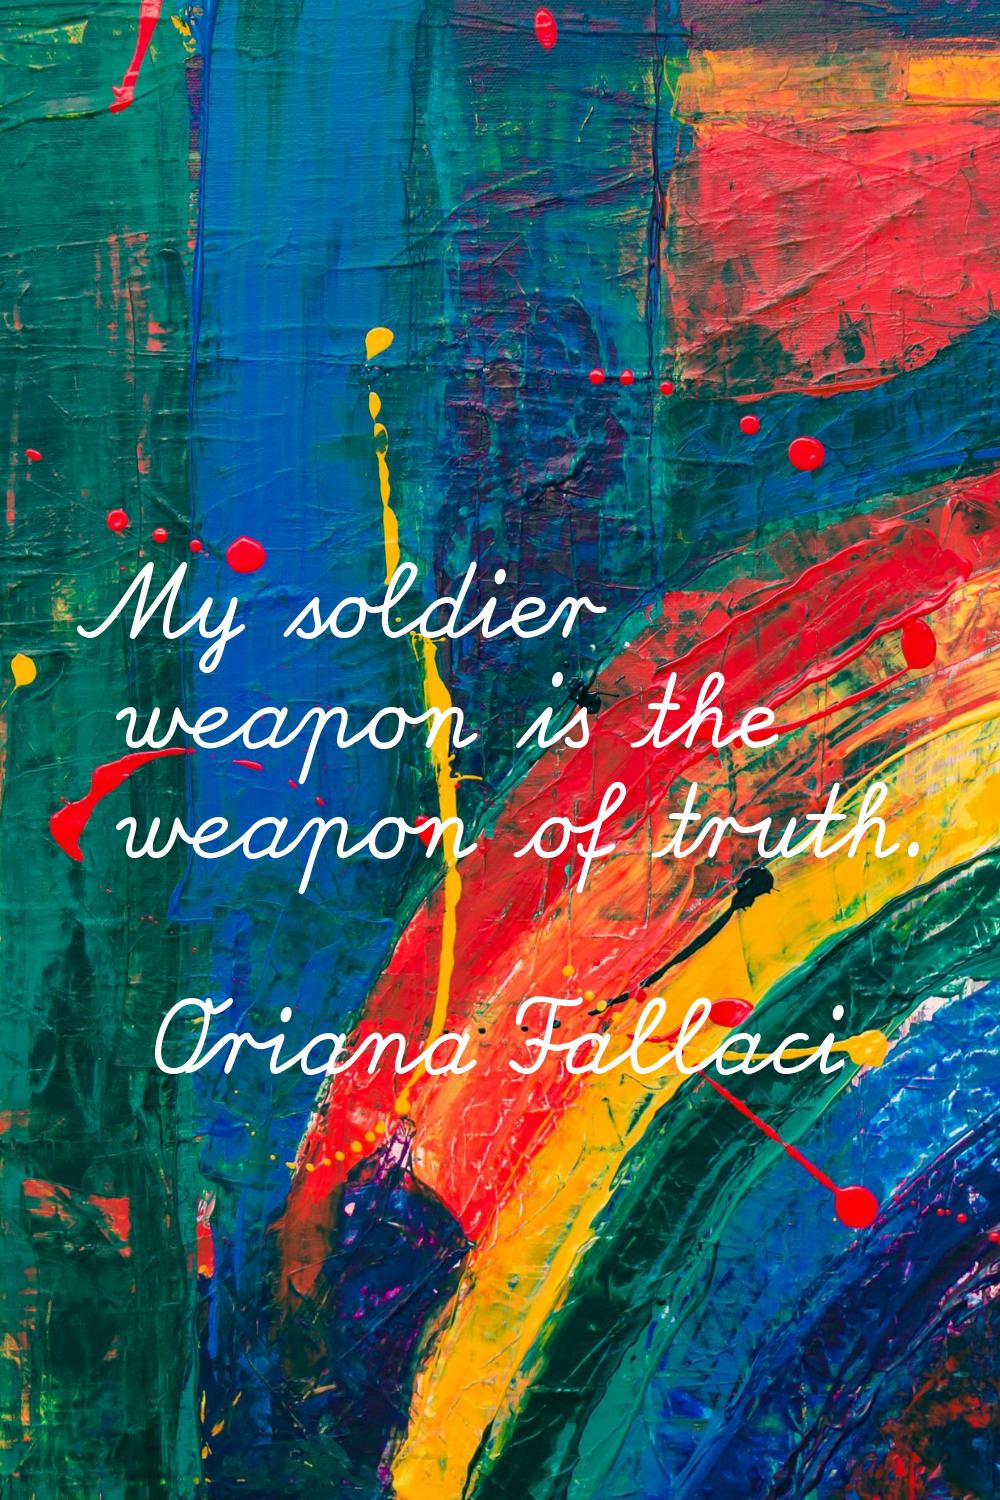 My soldier weapon is the weapon of truth.